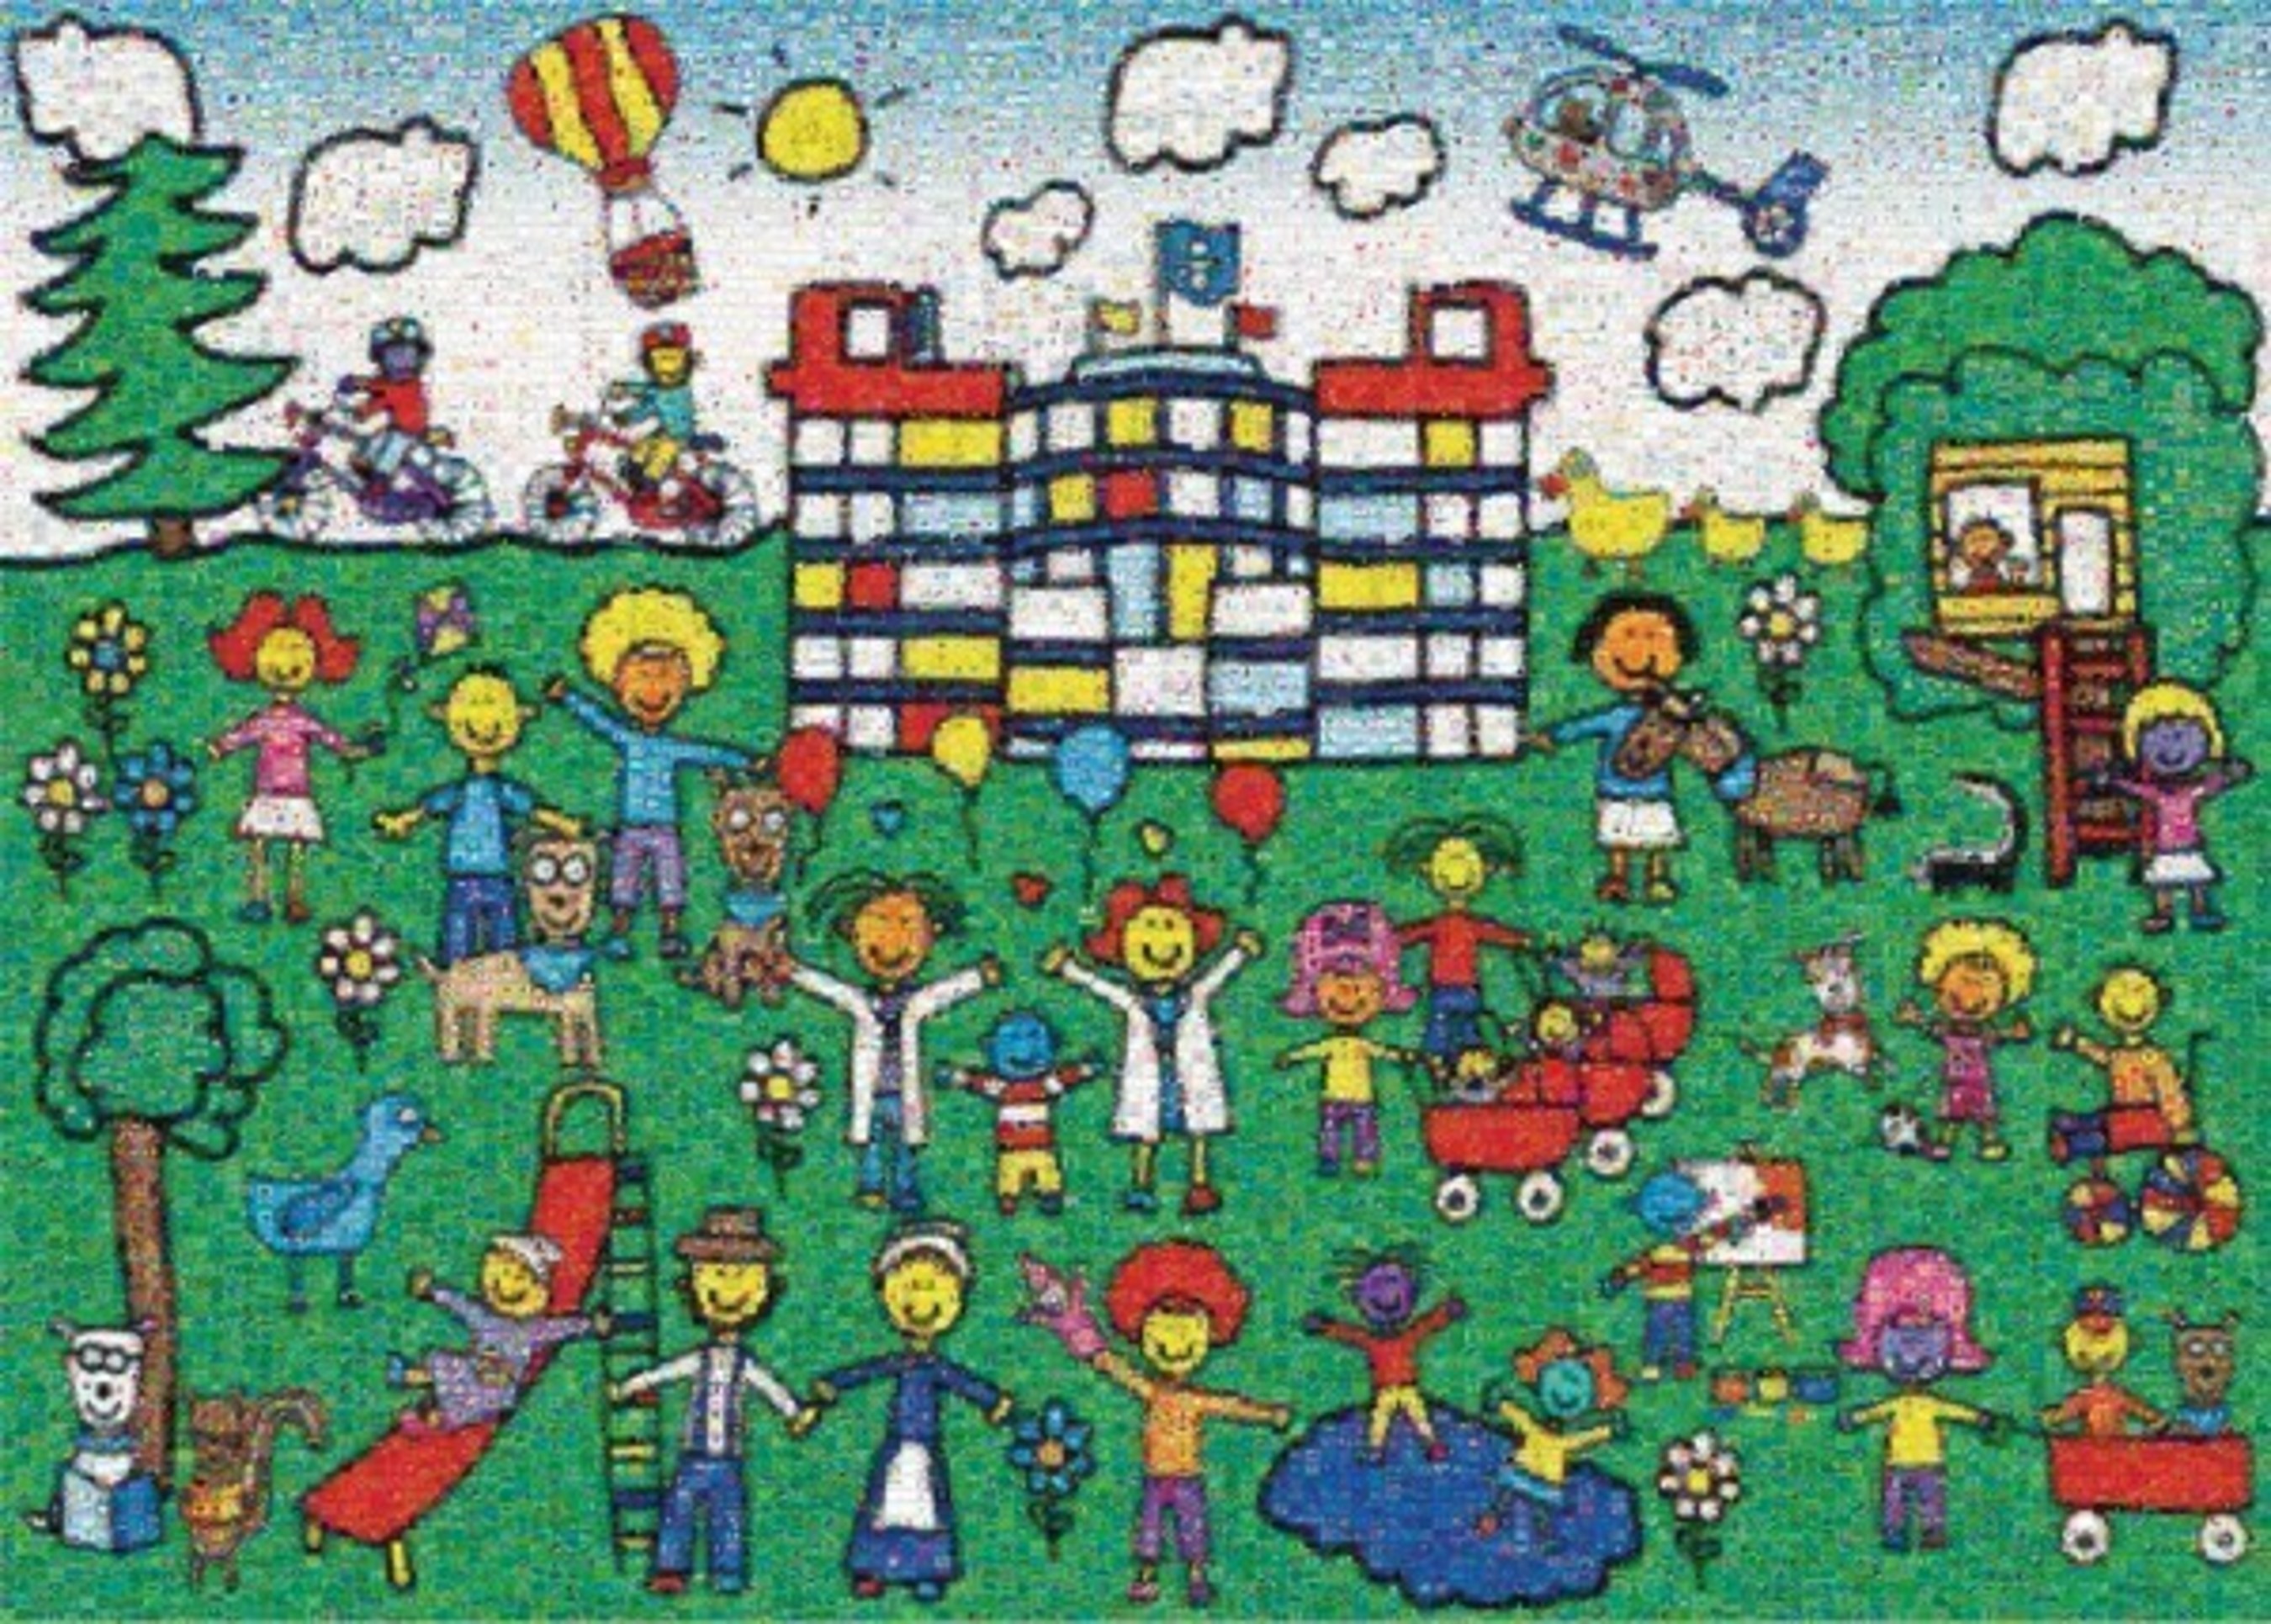 The "Celebrating Children's" mural was unveiled at Akron Children's Hospital in recognition of its 125th anniversary. The nearly 10,000 piece mosaic was created with artwork from the community.